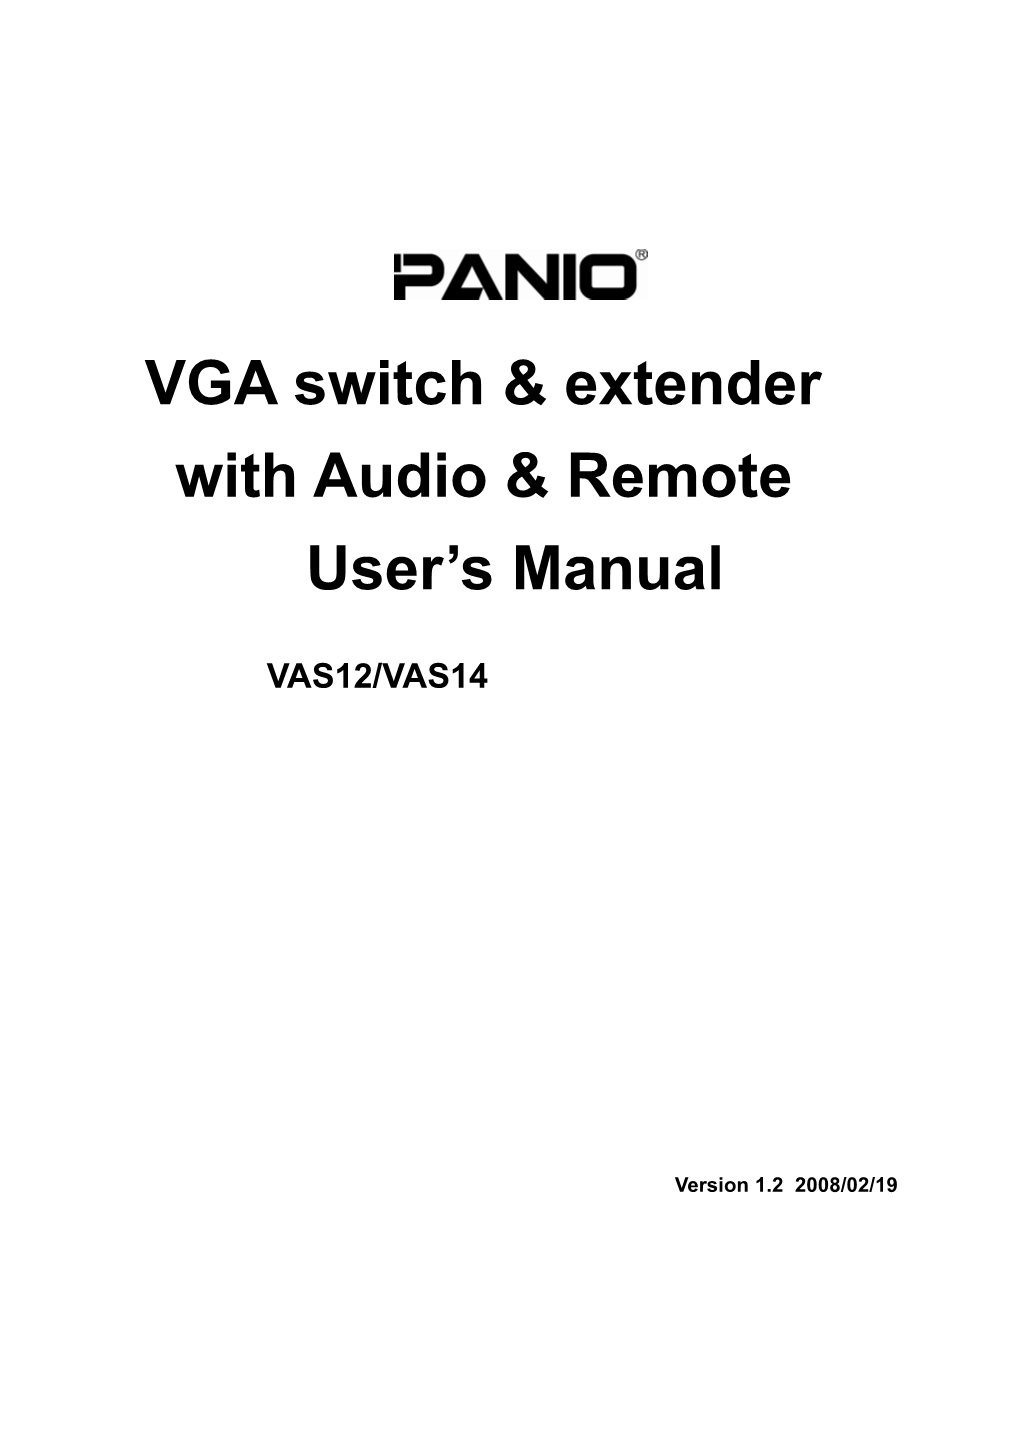 VGA Switch & Extender with Audio & Remote